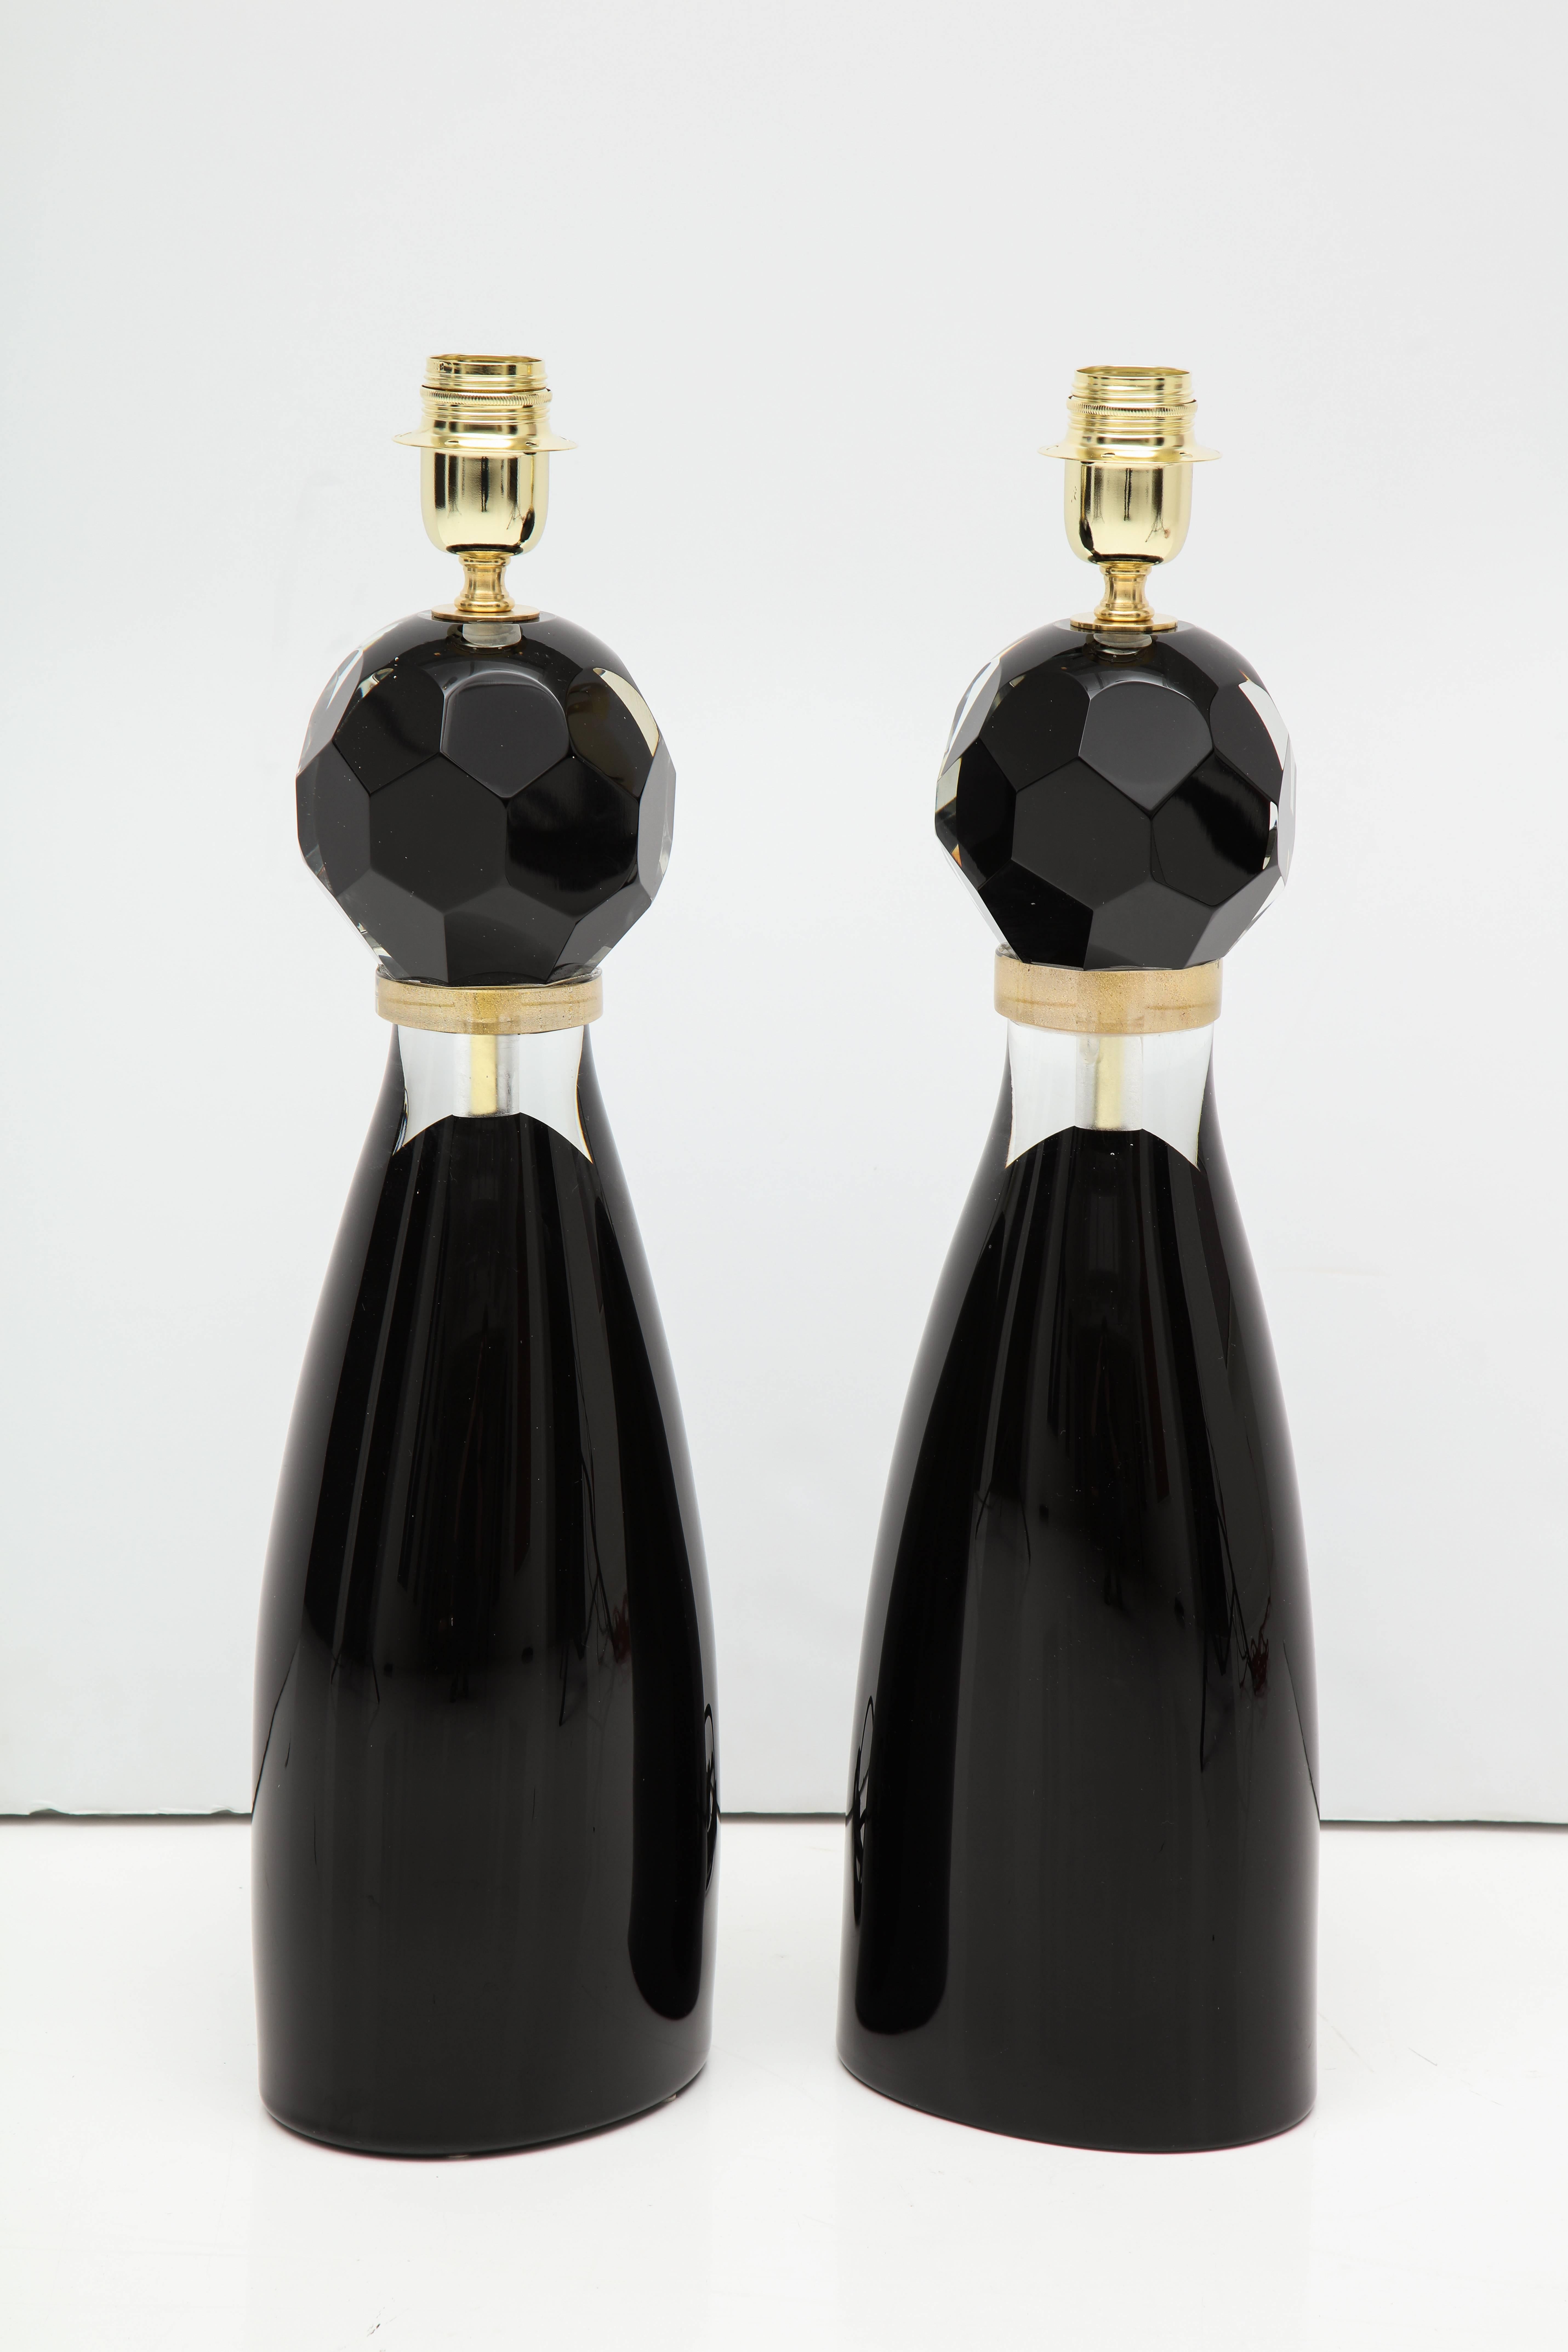 Pair of Italian hand blown Murano glass table lamps, consisting of a faceted black glass solid sphere atop a modern black and clear base. A gold glass ring separates the two glass elements. Signed by master glass maker Alberto Dona. The height of